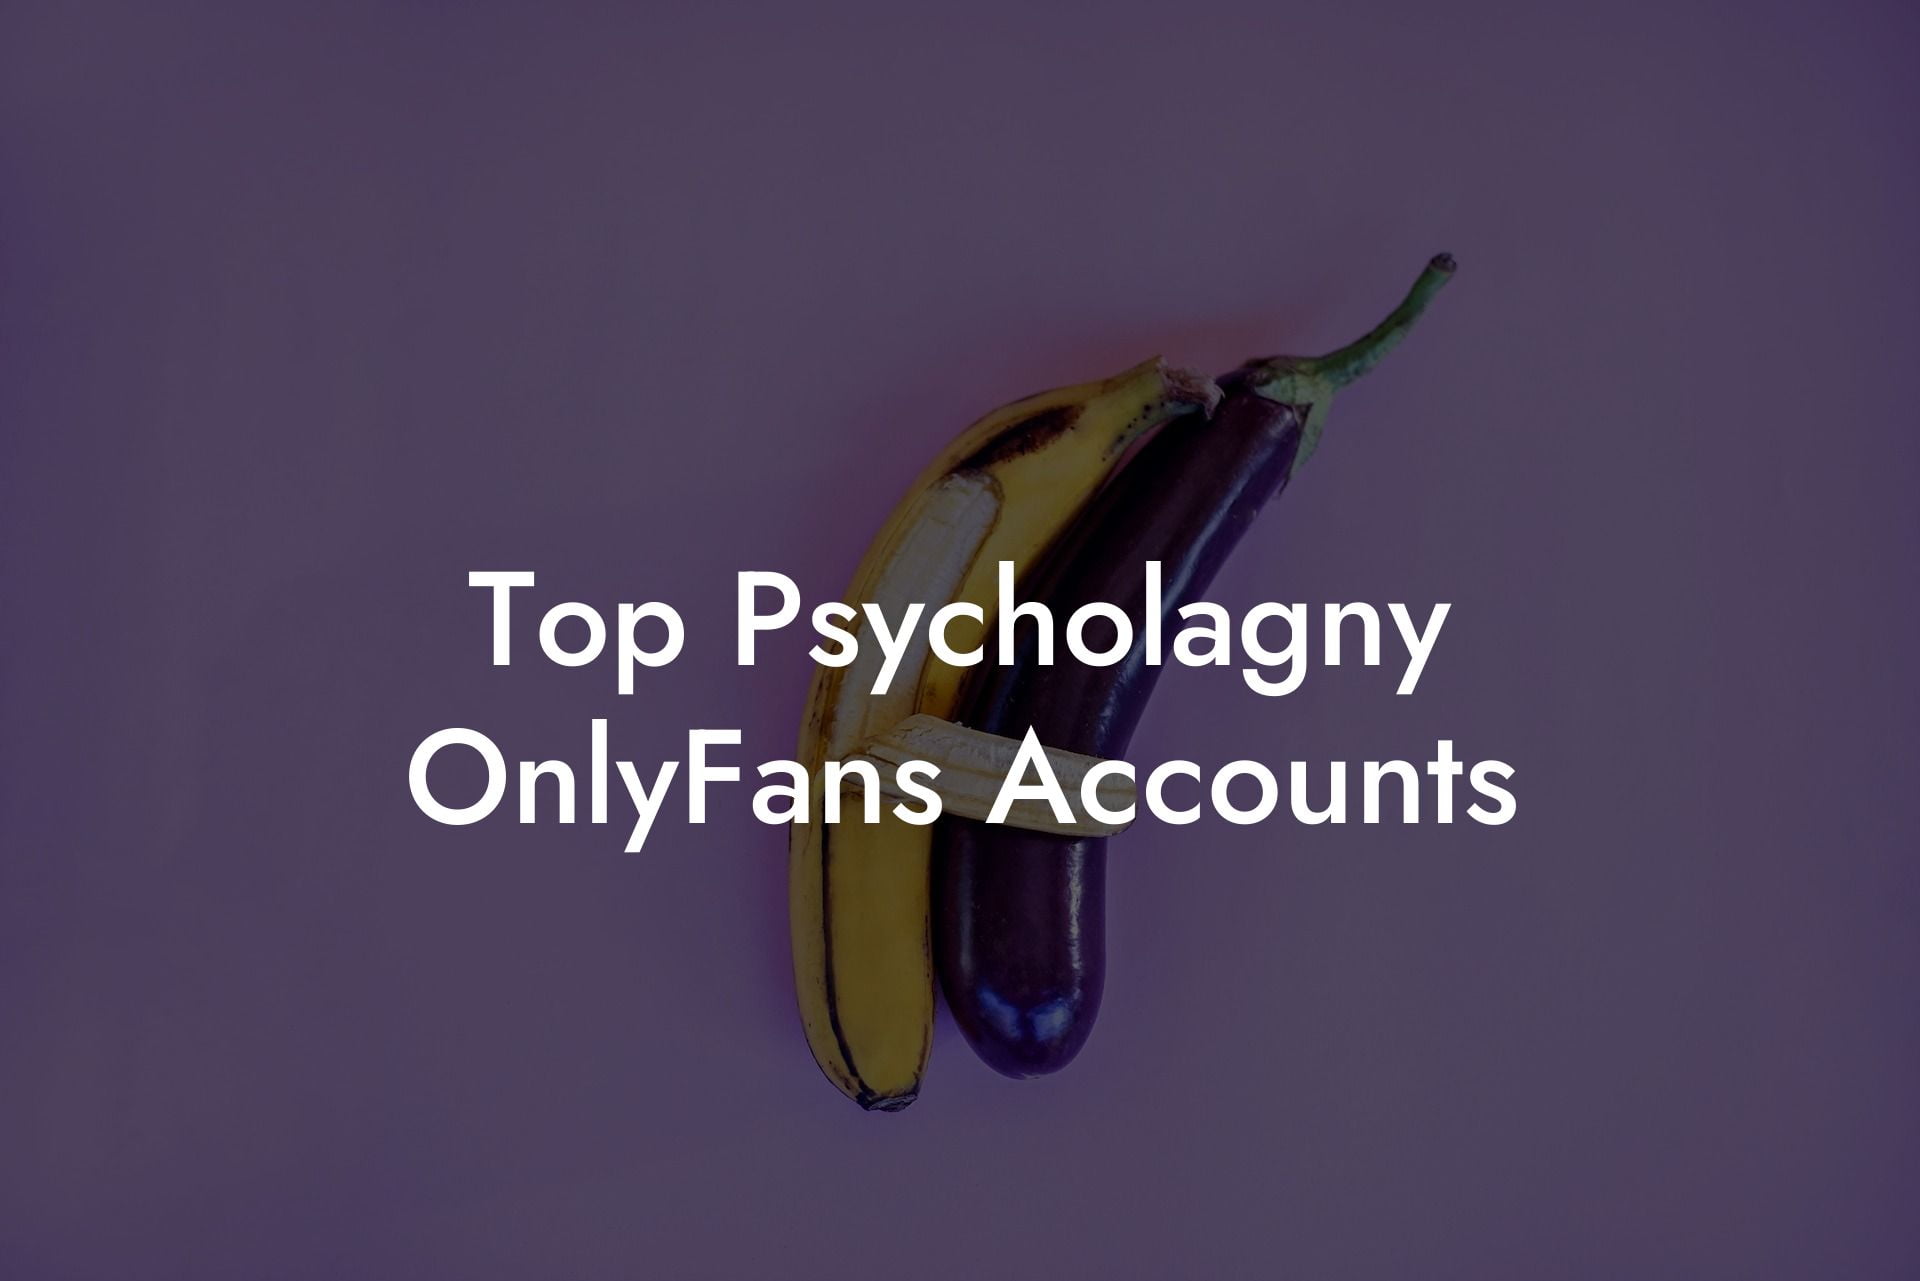 Top Psycholagny OnlyFans Accounts